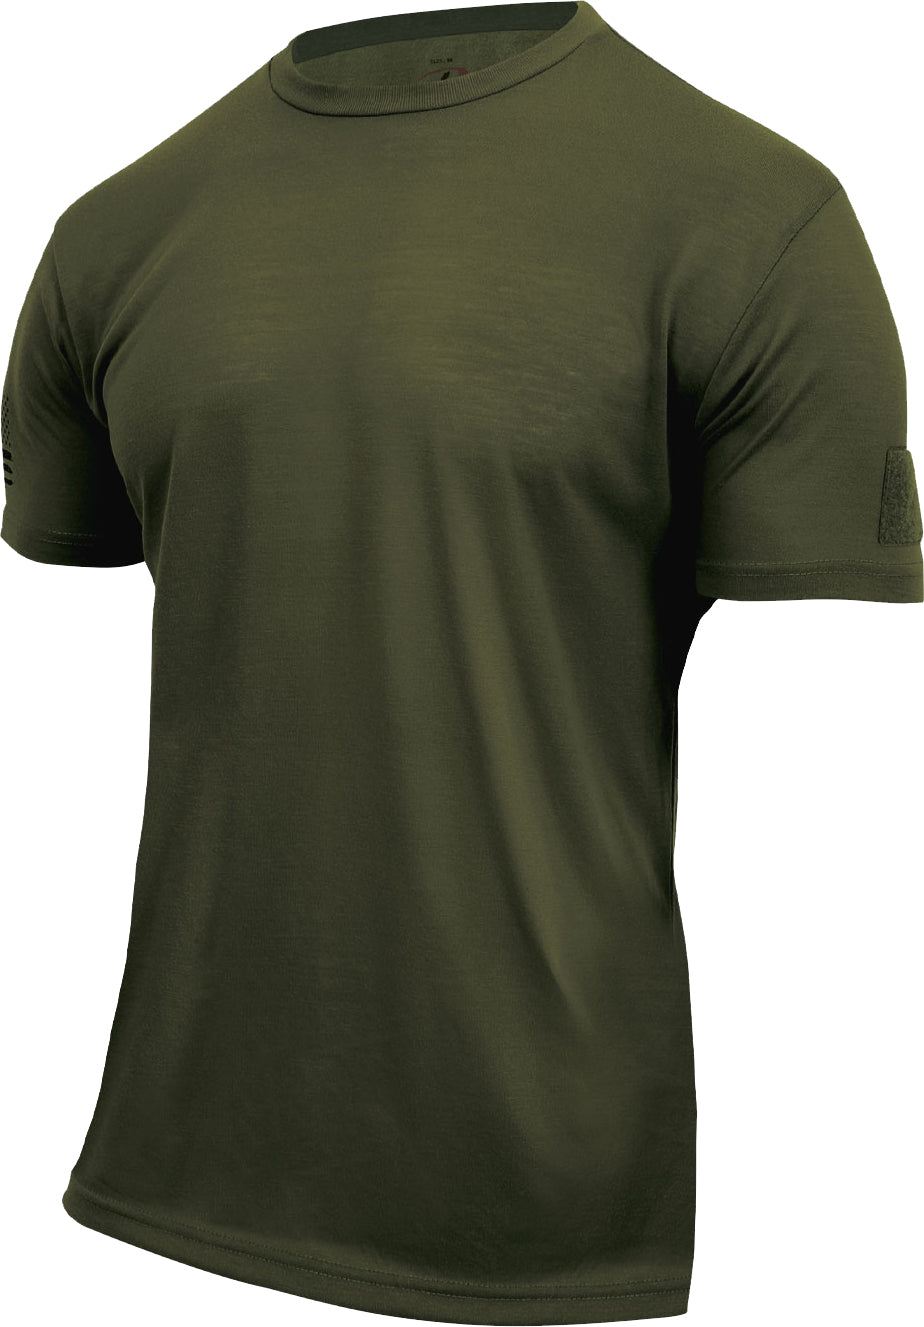 Olive Drab - Tactical Athletic Fit T-Shirt